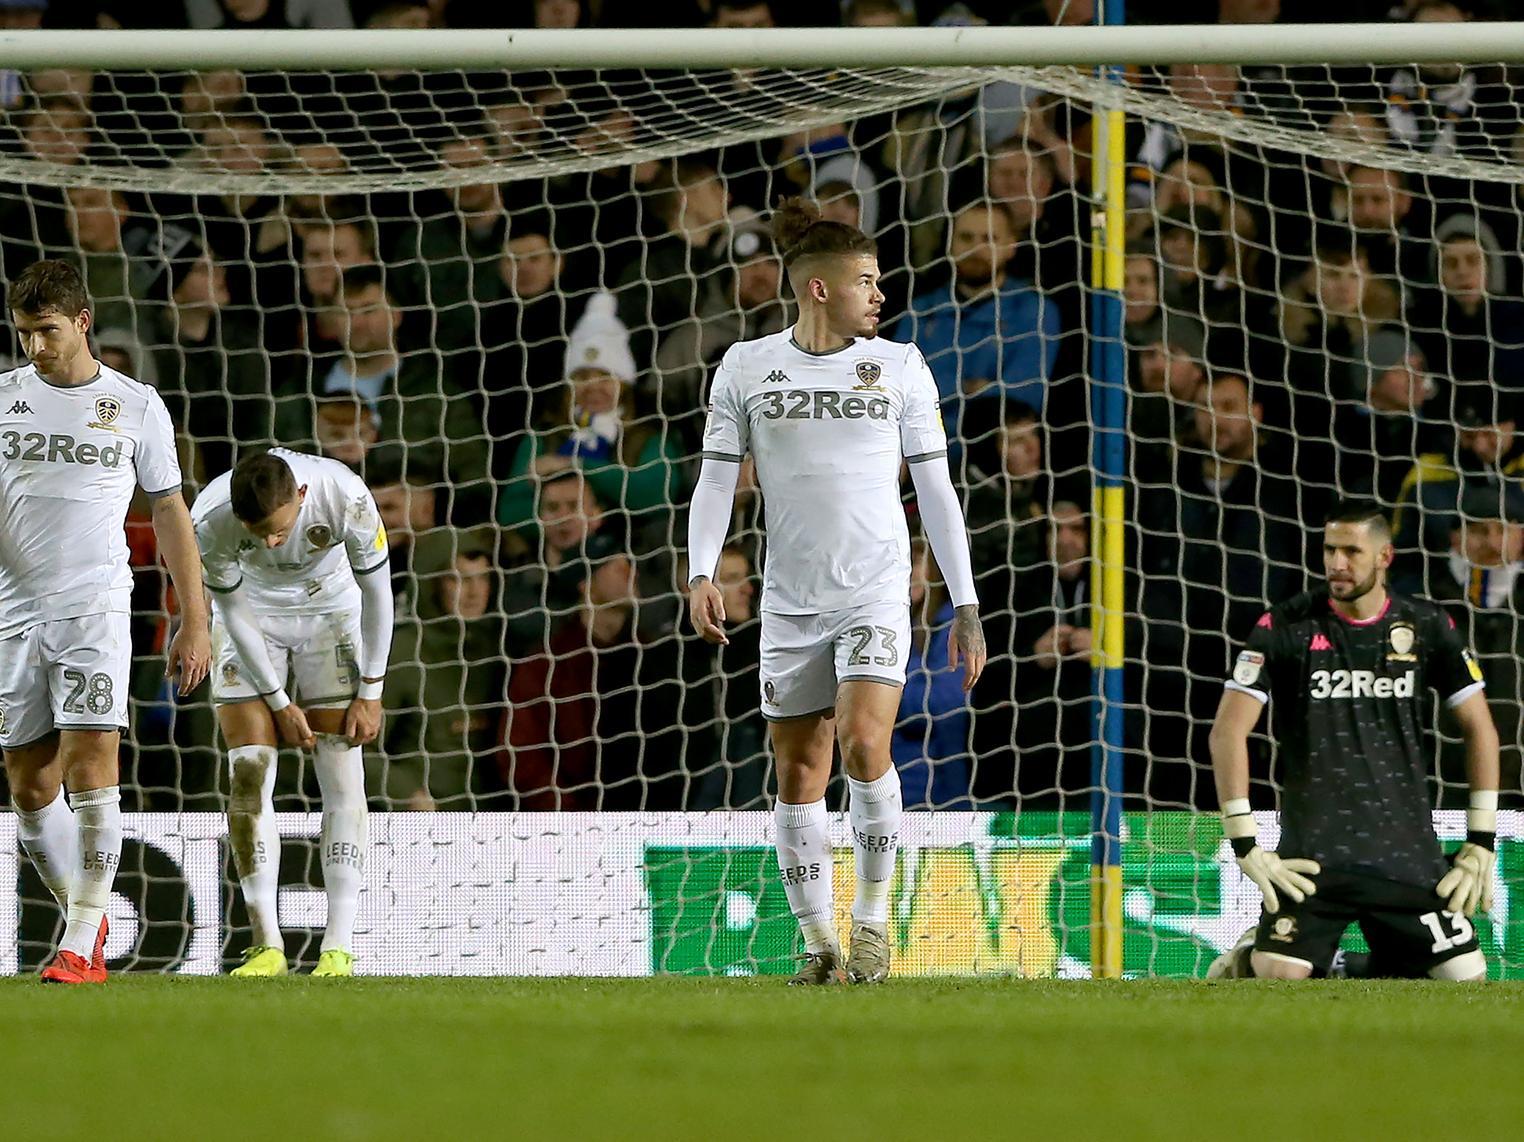 Leeds United players react following Cardiff's late equaliser at Elland Road. (Getty)